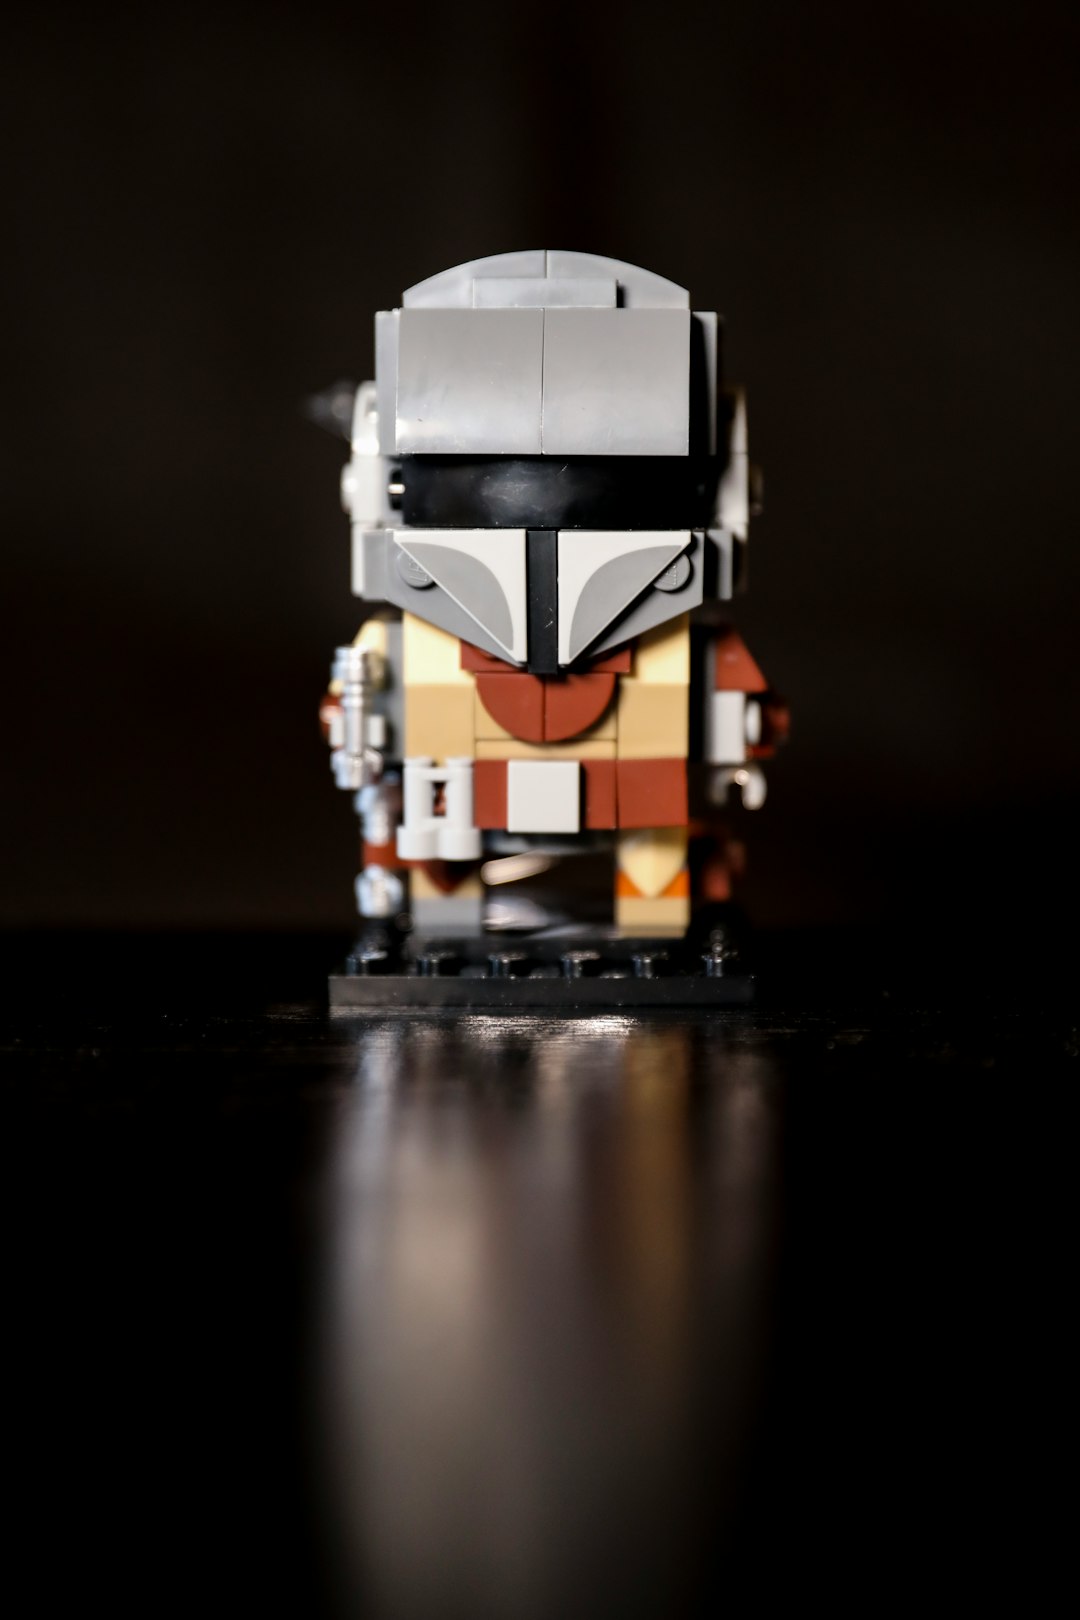 white and black robot toy